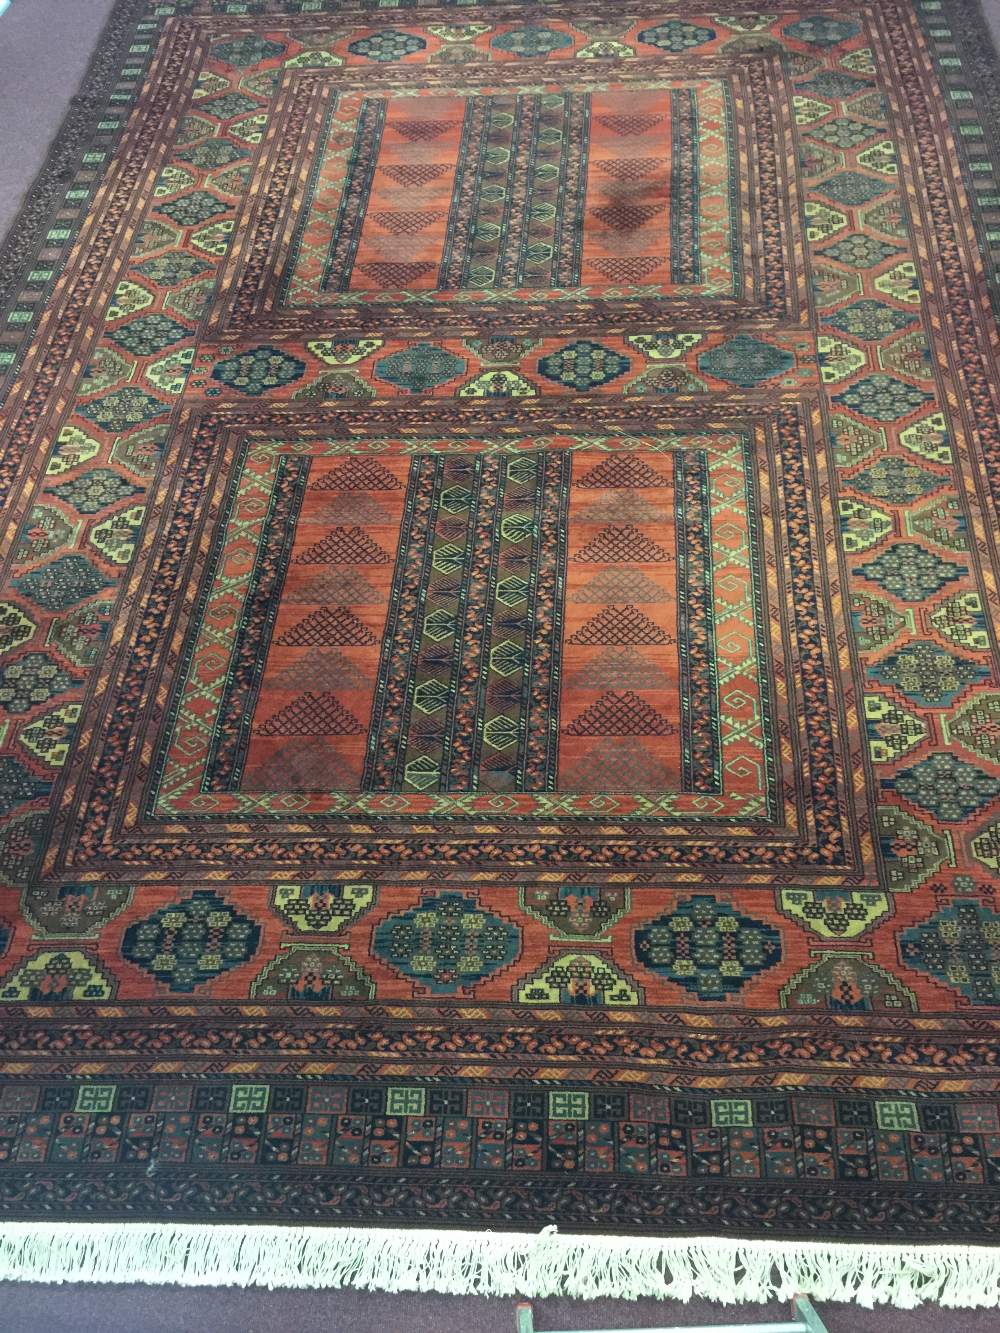 20th cent. Turkoman red ground carpet deep blue refreshed with white elephant foot medallions 5